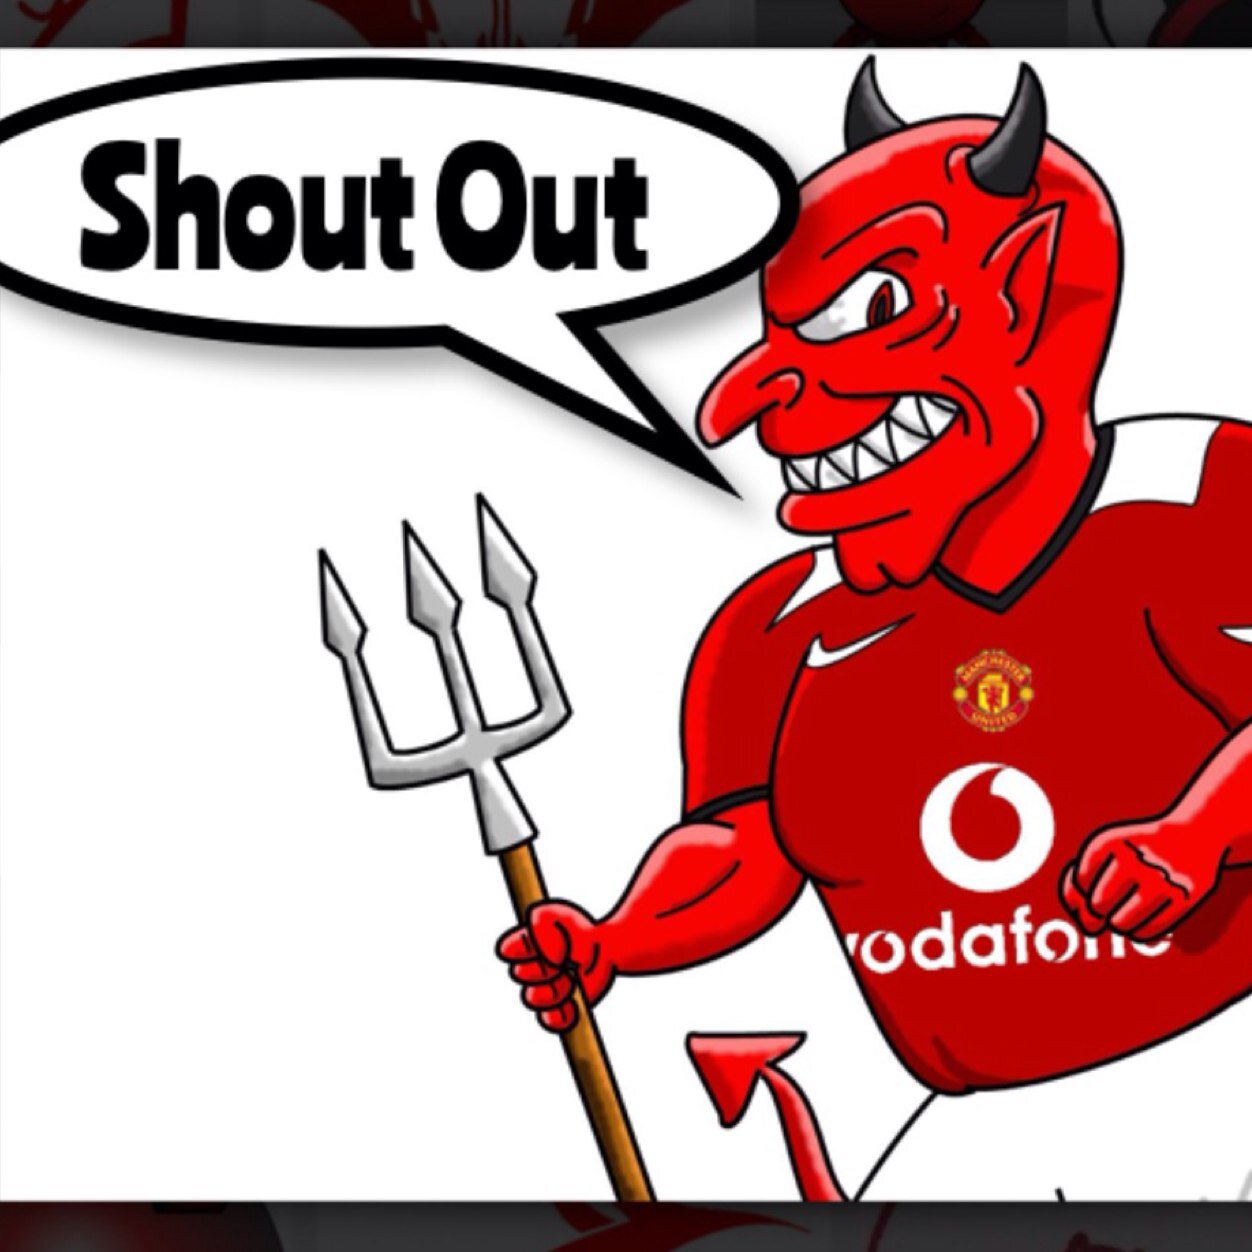 This account will high light all those mighty red devils that are a little bit mightier then the rest.